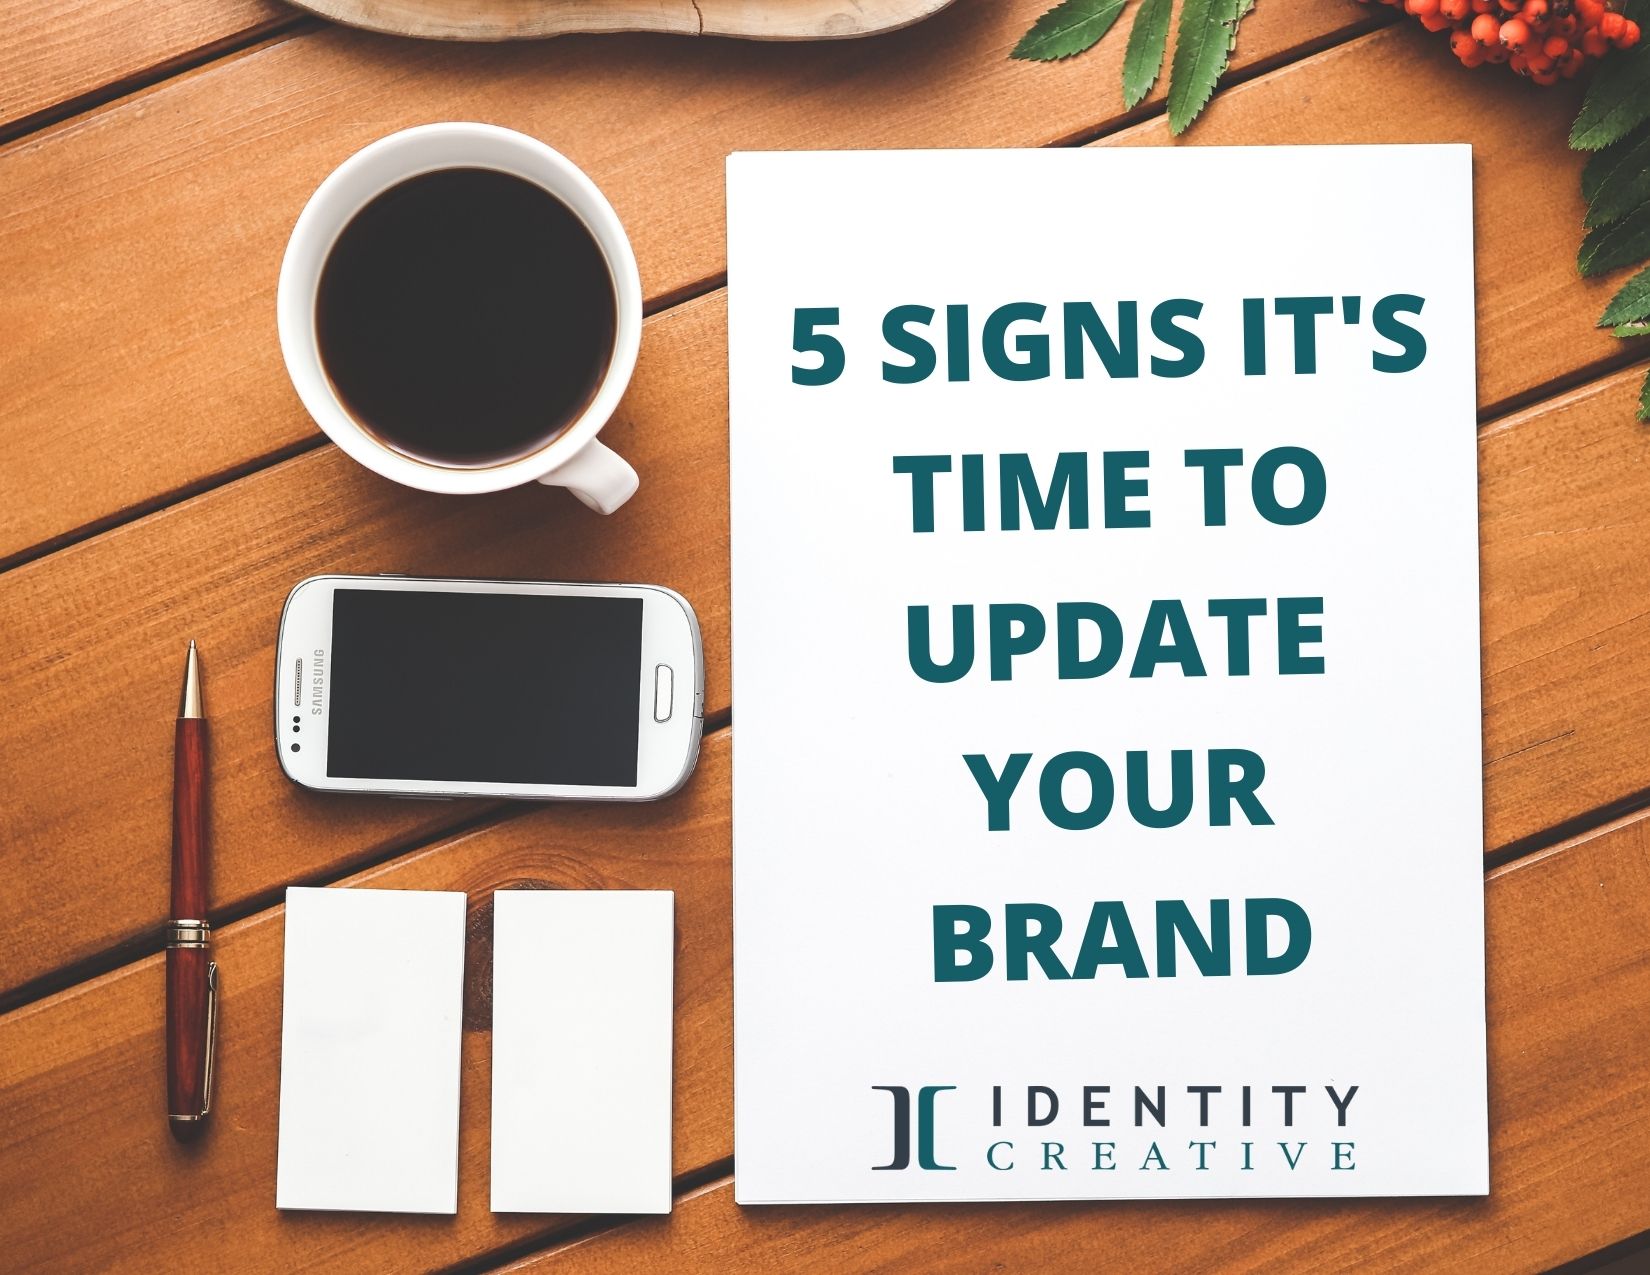 Do you need a brand refresh or a complete overhaul? 5 Clear Signs It’s Time!